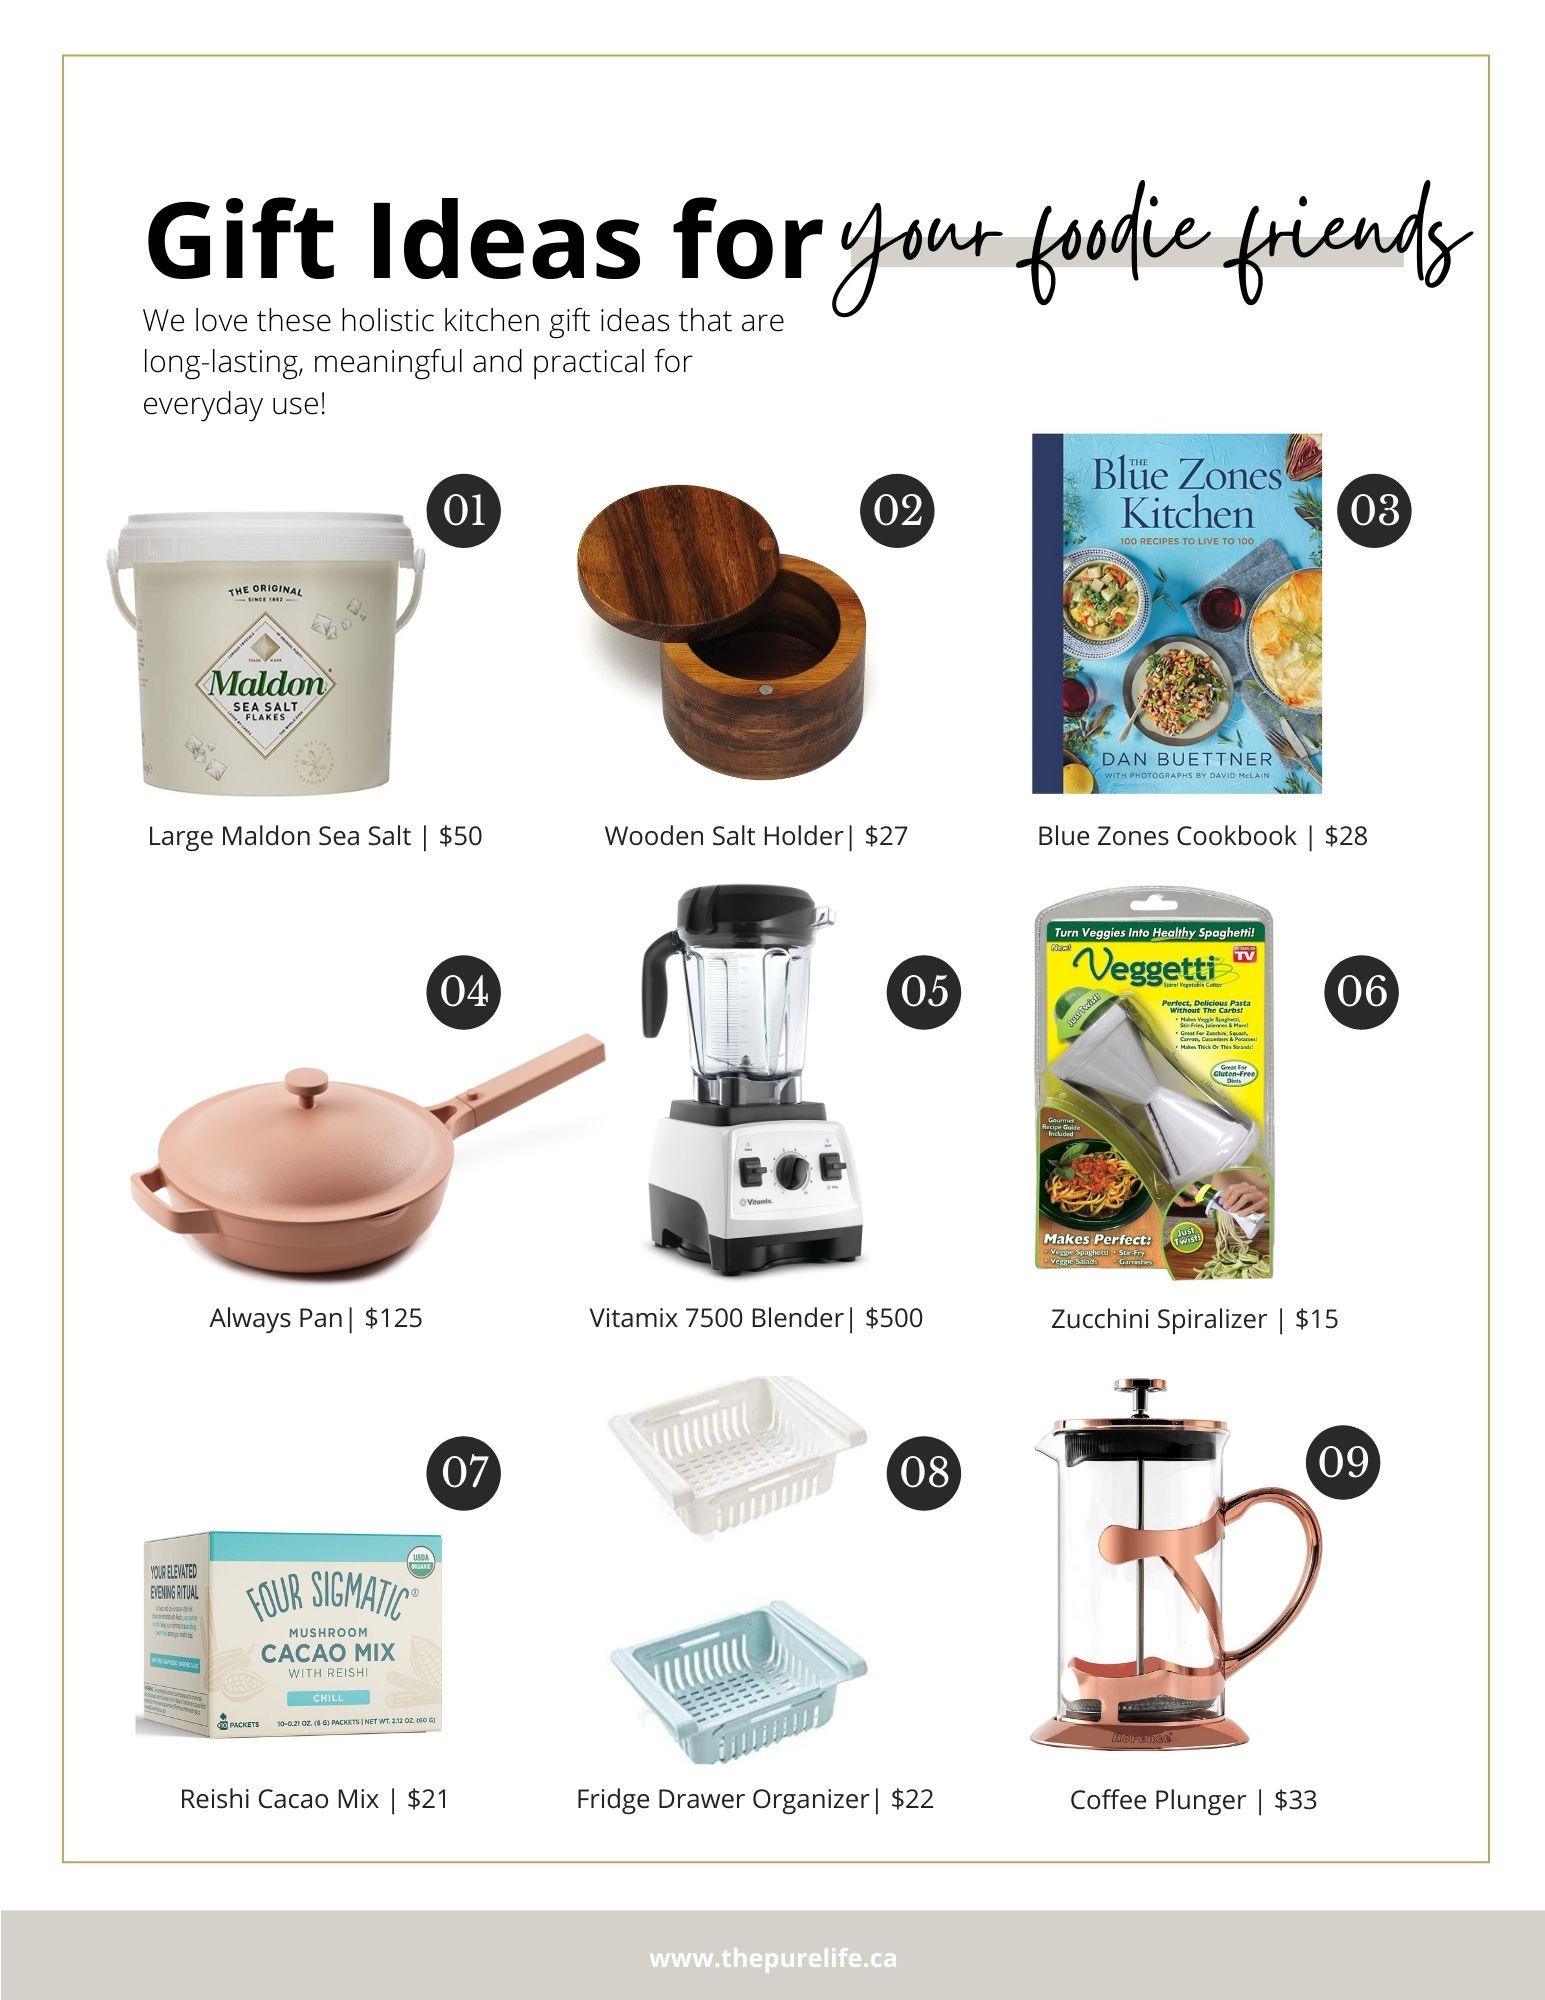 gift guide for foodies